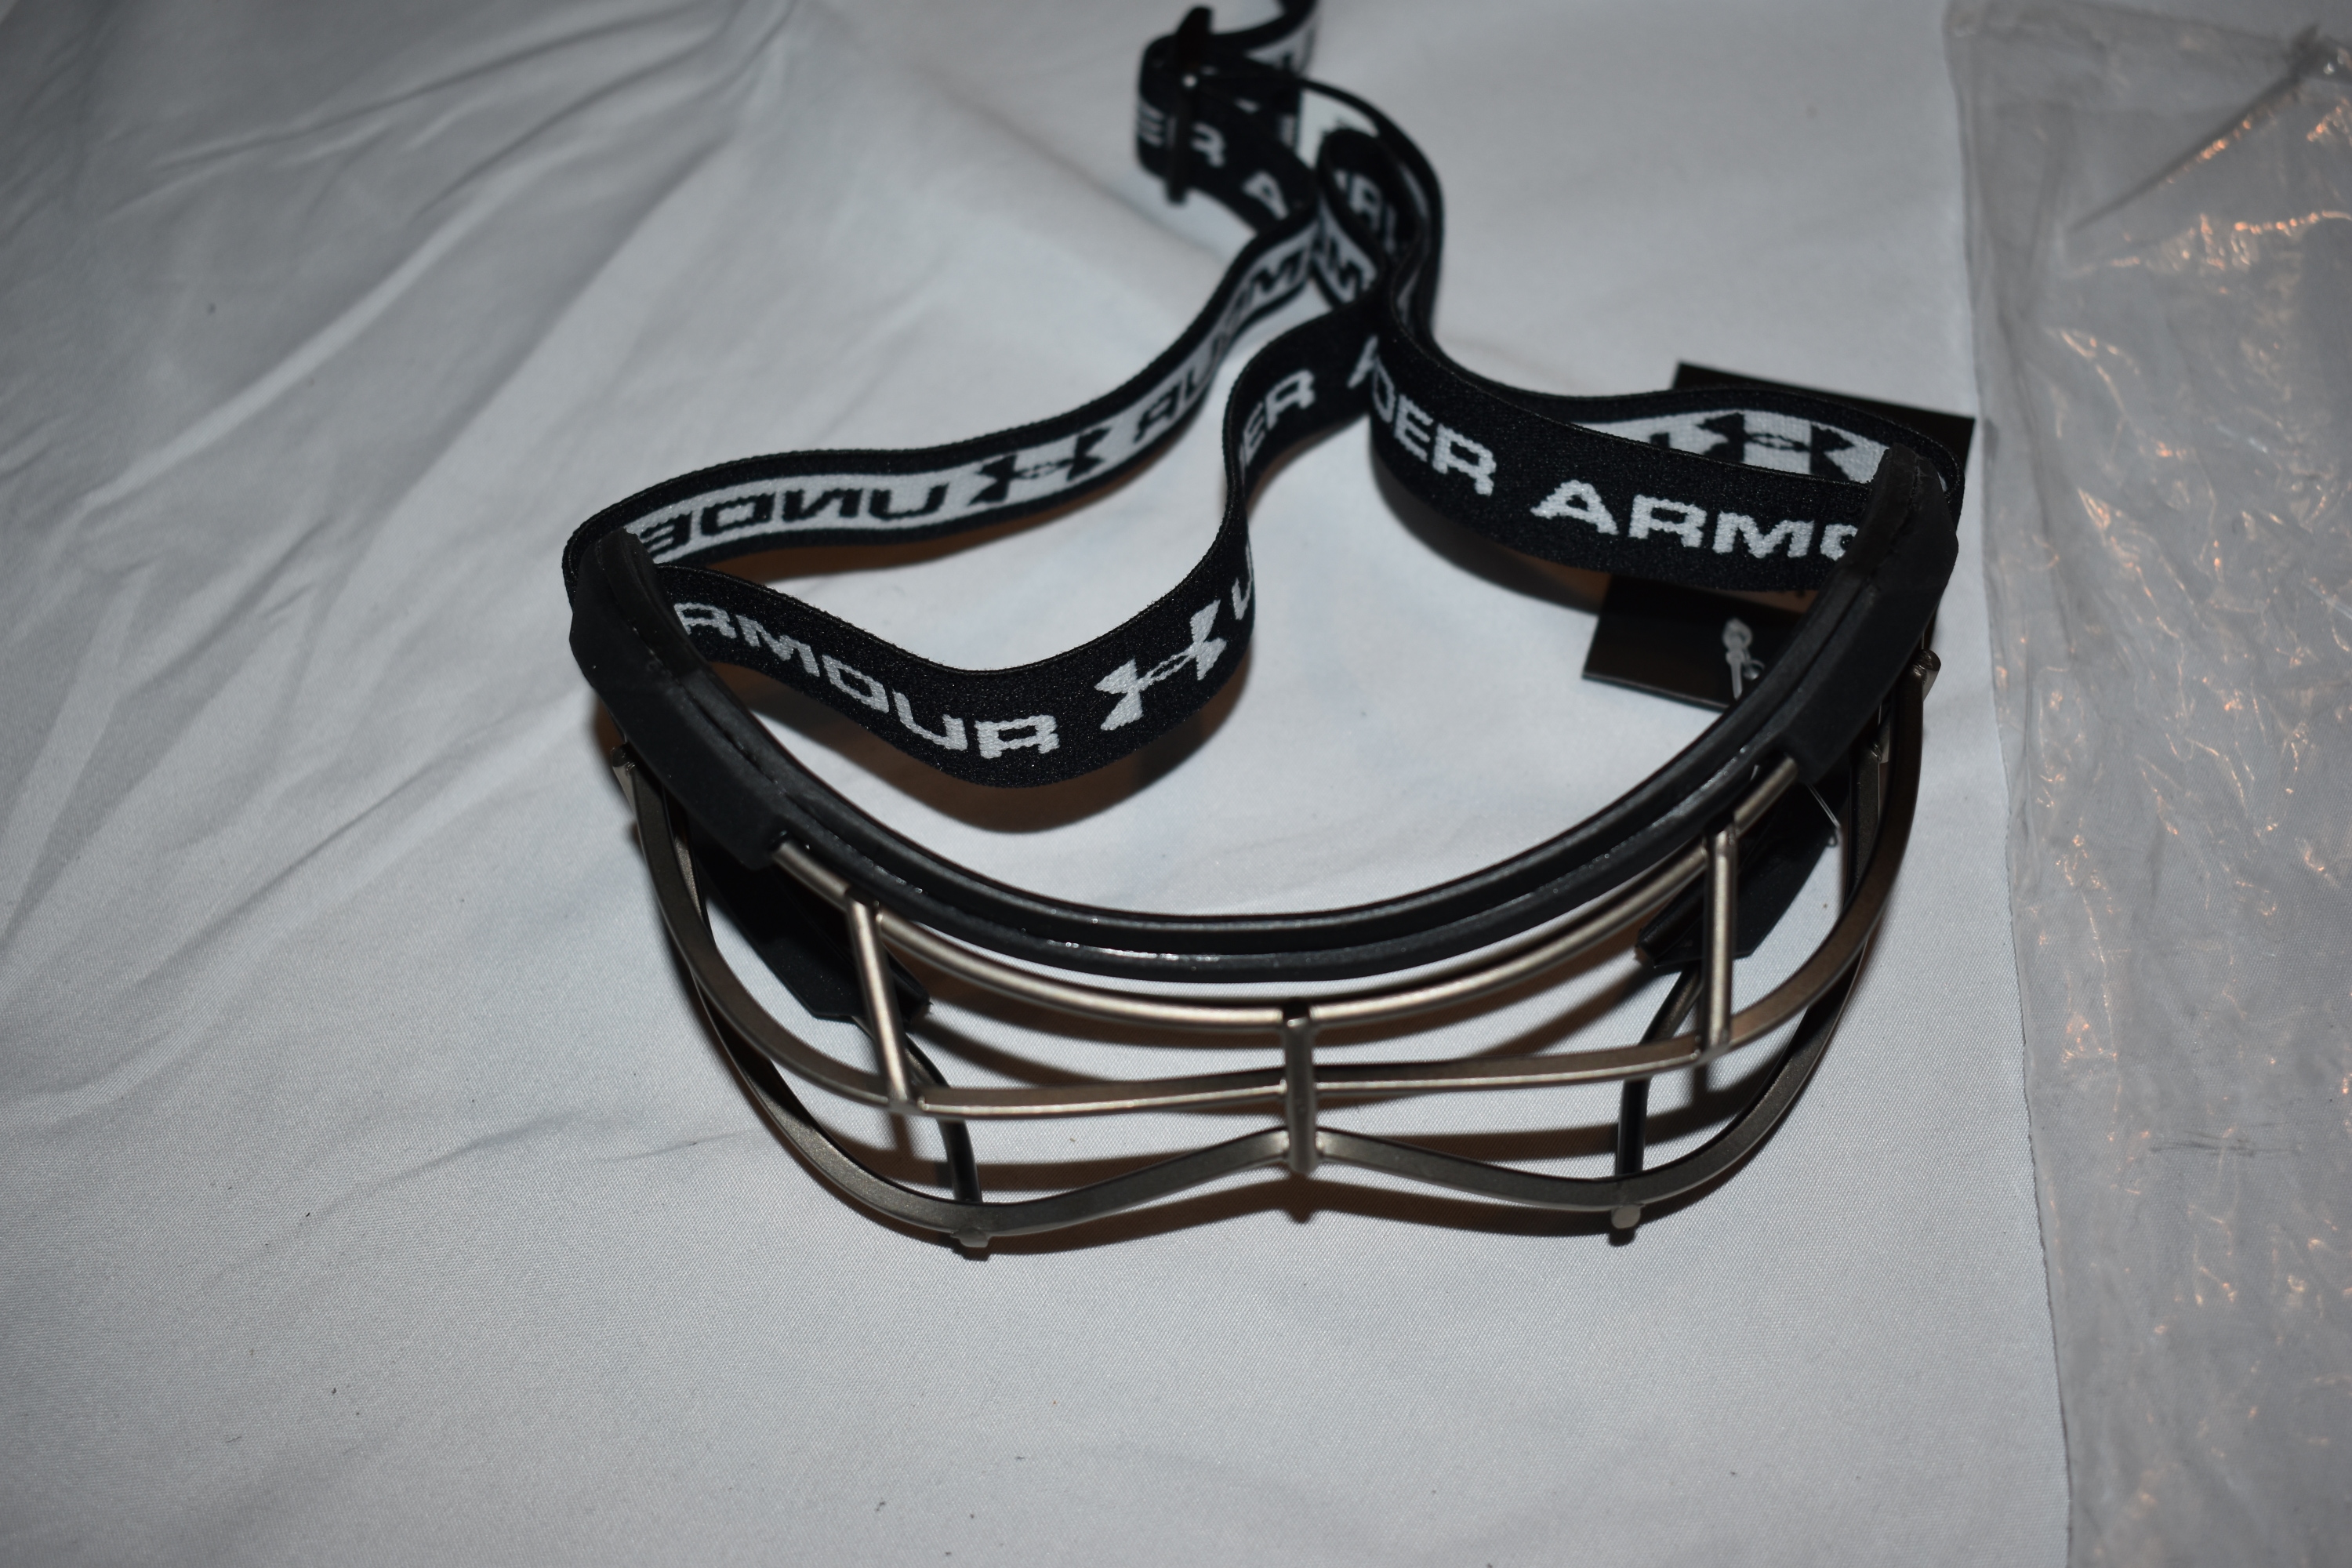 NEW - Under Armour Glory TI Lacrosse Goggles - With Tag!